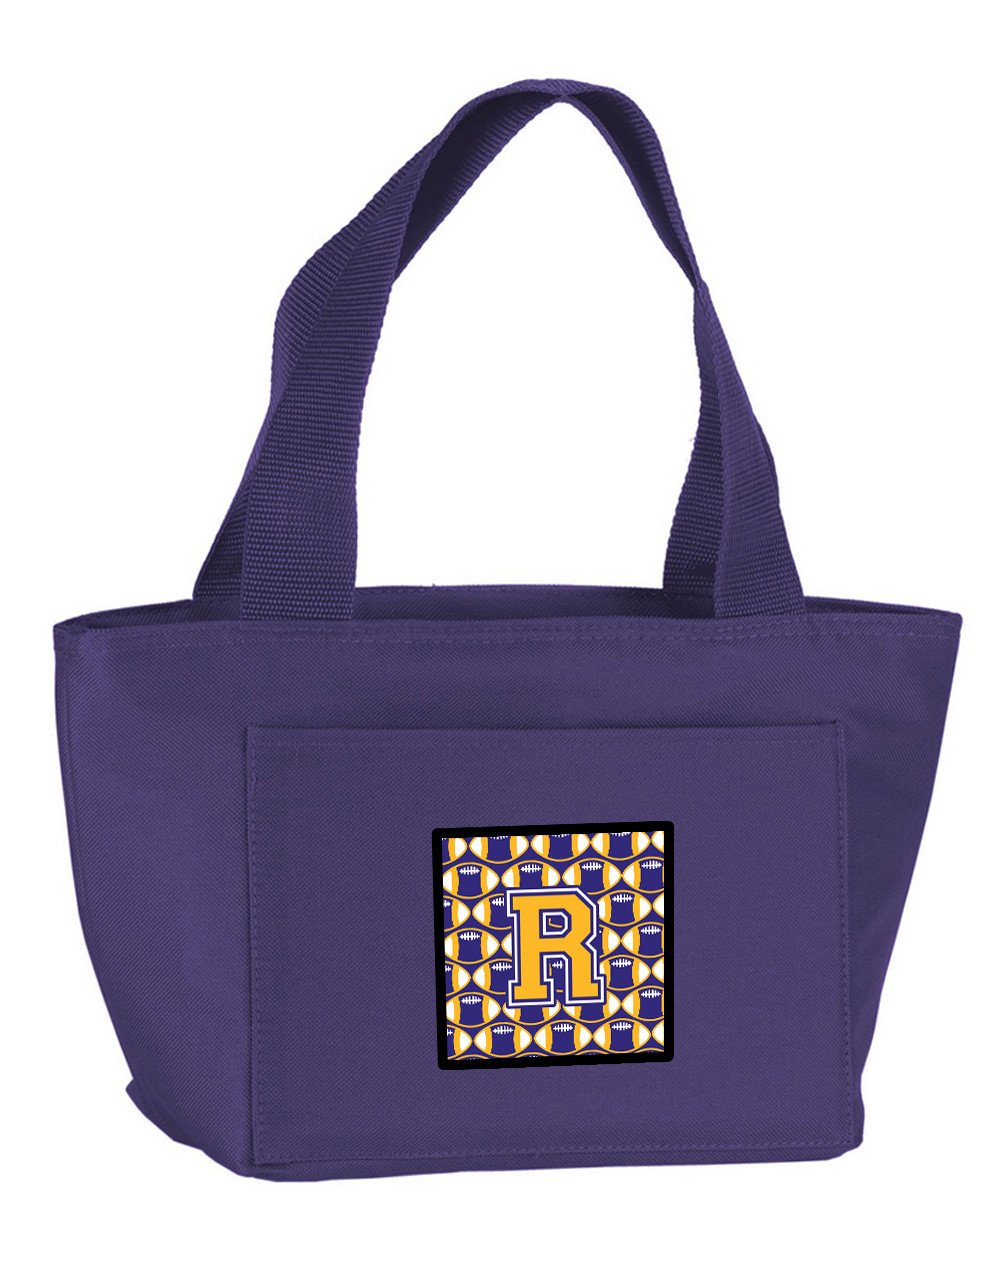 Letter R Football Purple and Gold Lunch Bag CJ1064-RPR-8808 by Caroline's Treasures